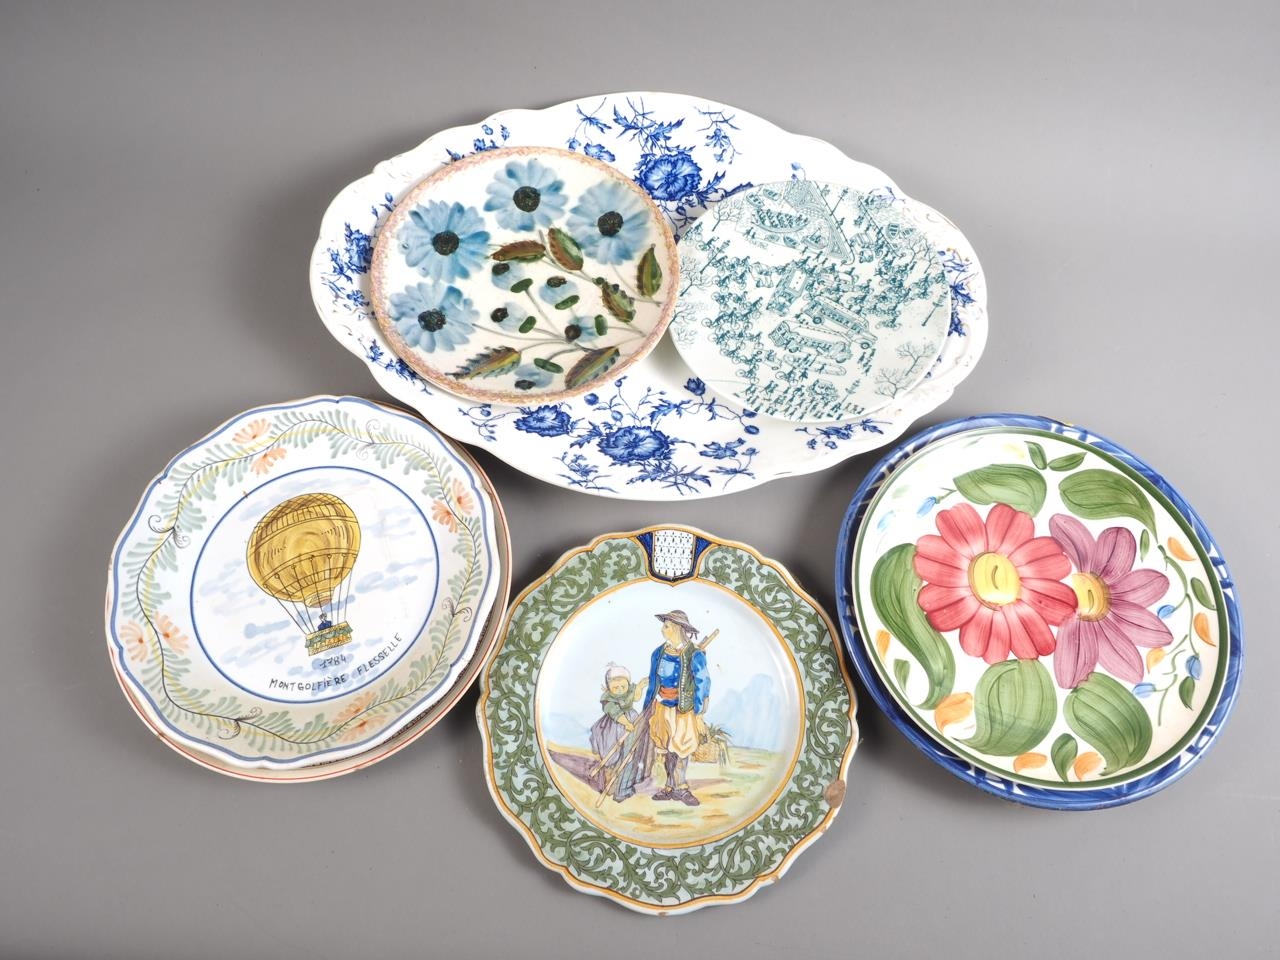 Two French faience plates, ballooning and fisher folk, and other decorative plates (chips to one